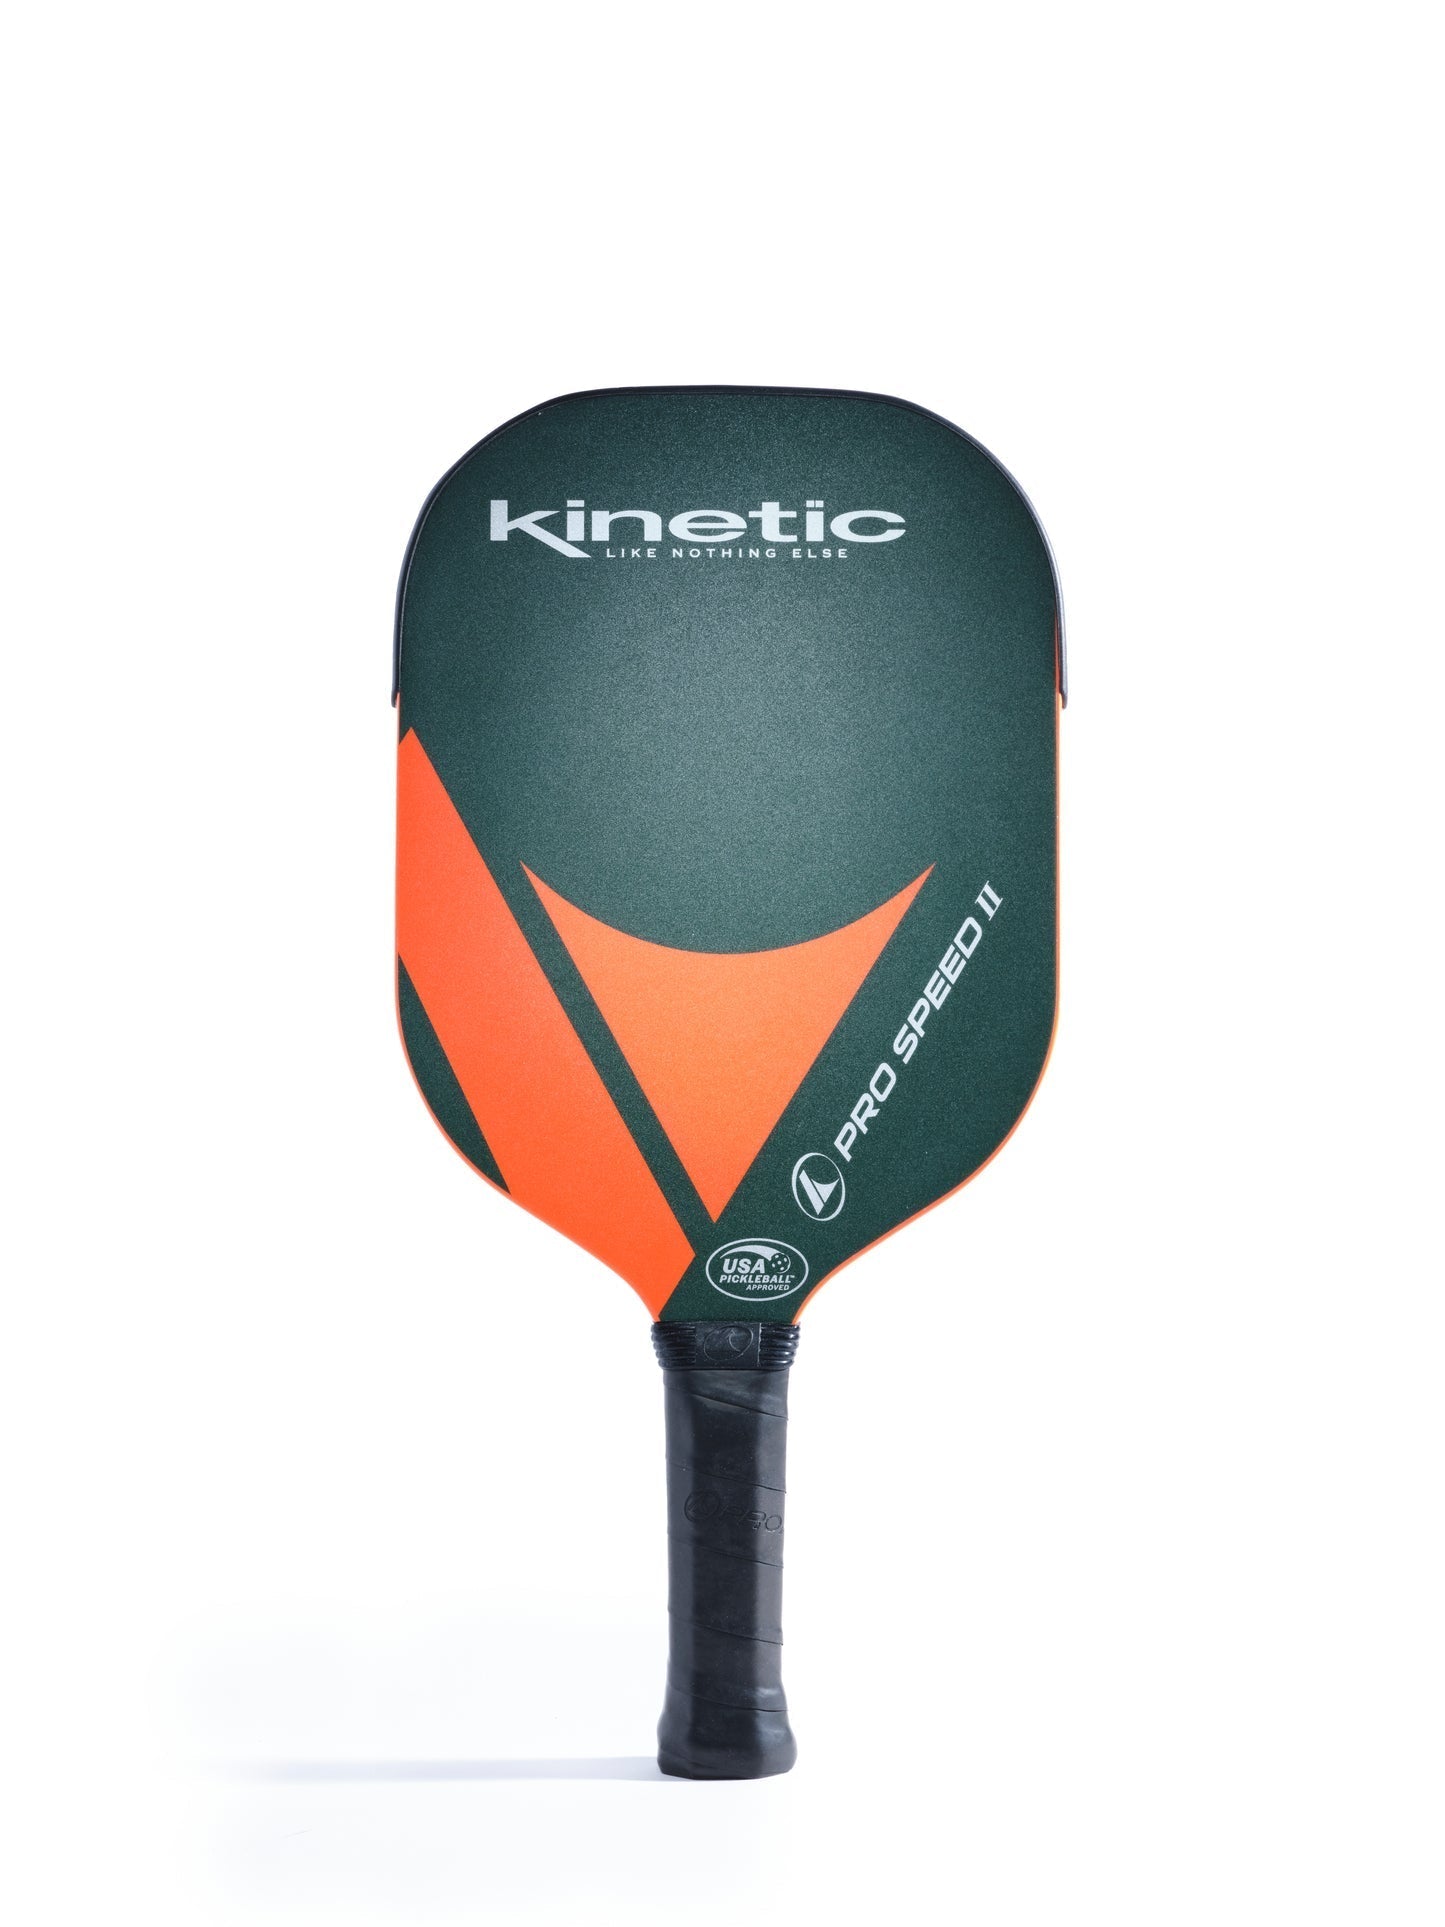 A pickleball paddle with a green and orange design, labeled "Pickleballist ProKennex Kinetic Pro Speed II Pickleball Paddle," against a white background.